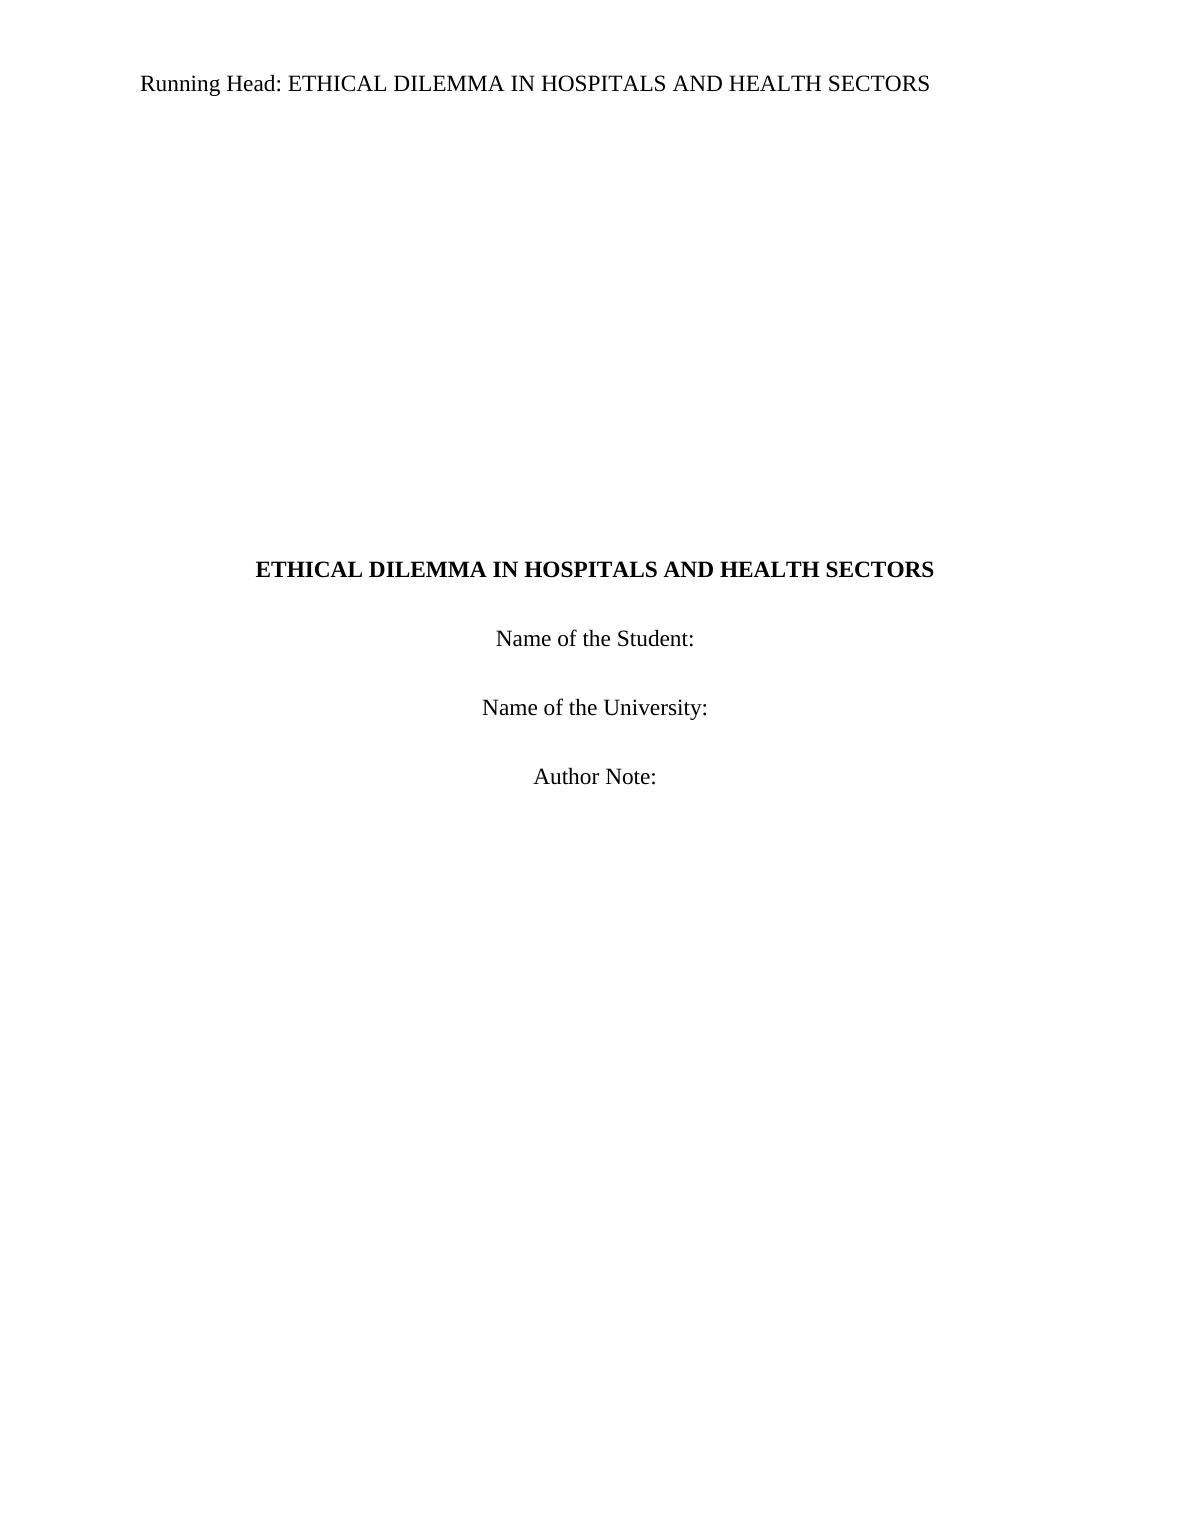 Ethical Dilemma in Hospitals and Health Sectors_1